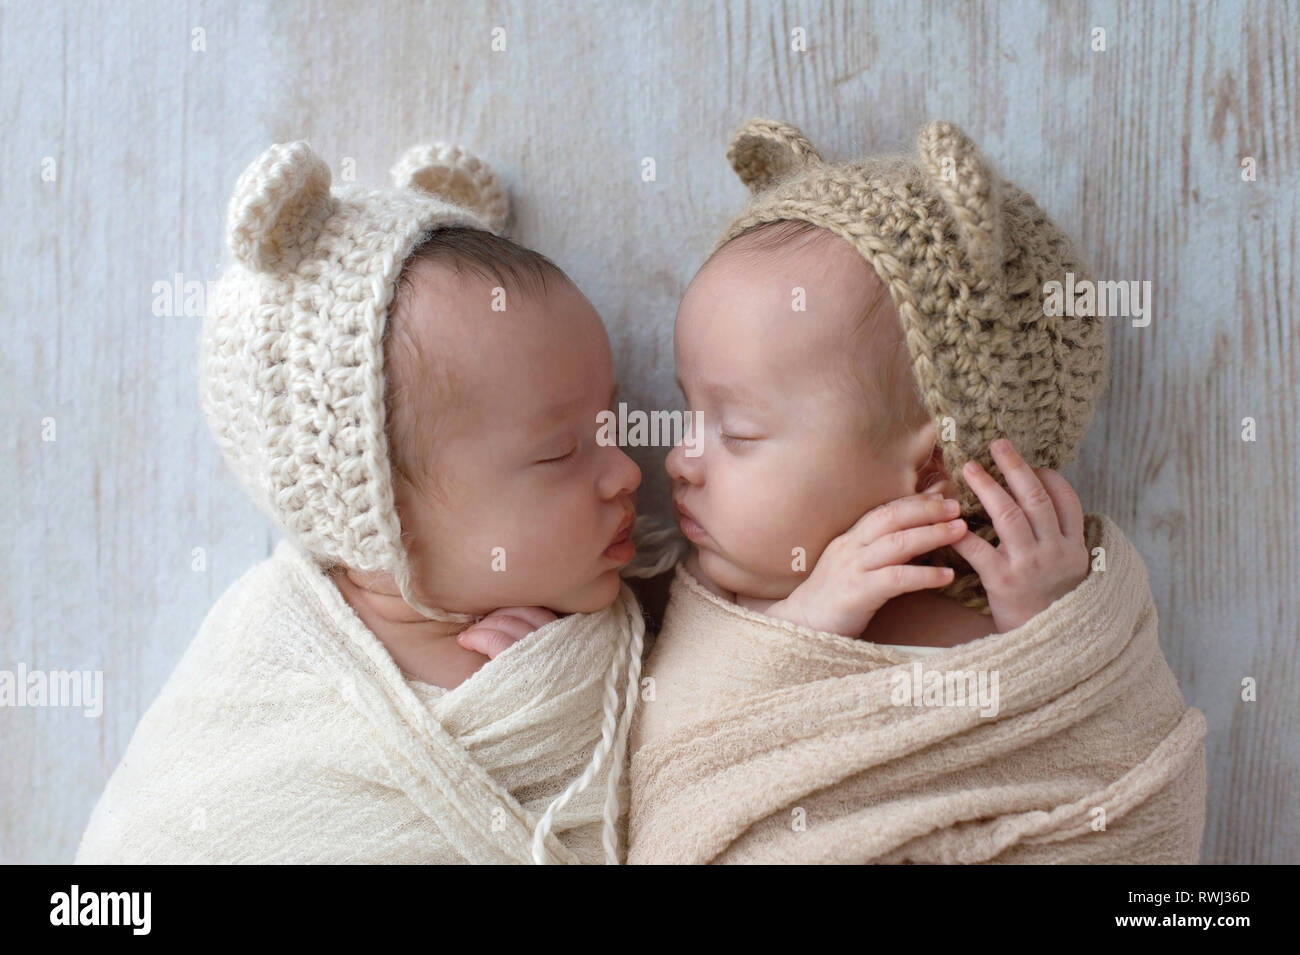 Profile headshot of two, fraternal, twin, baby girls sleeping. They are wearing crocheted bear hats and are swaddled in cream and tan wraps. Stock Photo